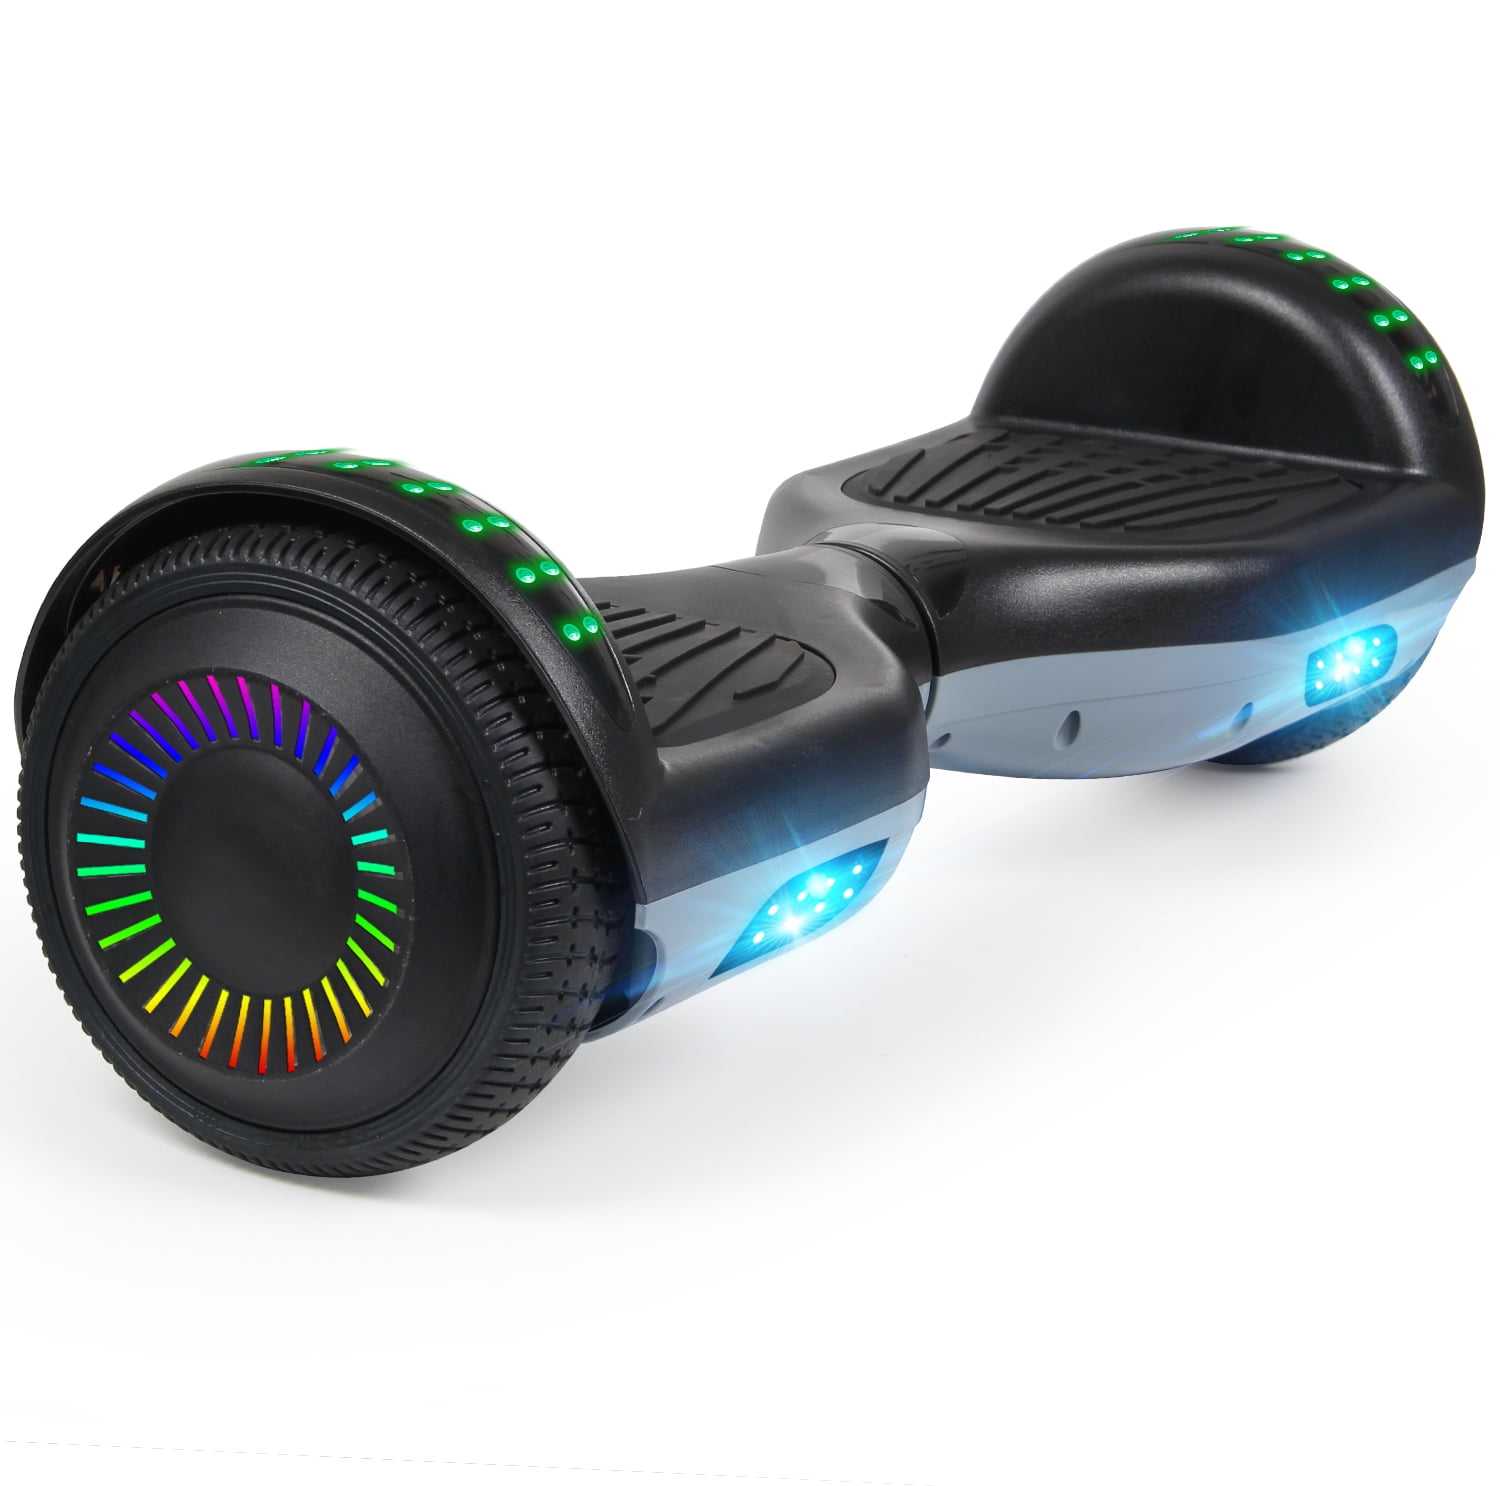 CBD Hoverboard for Kids UL 2272 Certified Hover Board Hoverboard with Bluetooth Speaker and LED Lights for Adults 6.5 Electric Self Balancing Scooter 